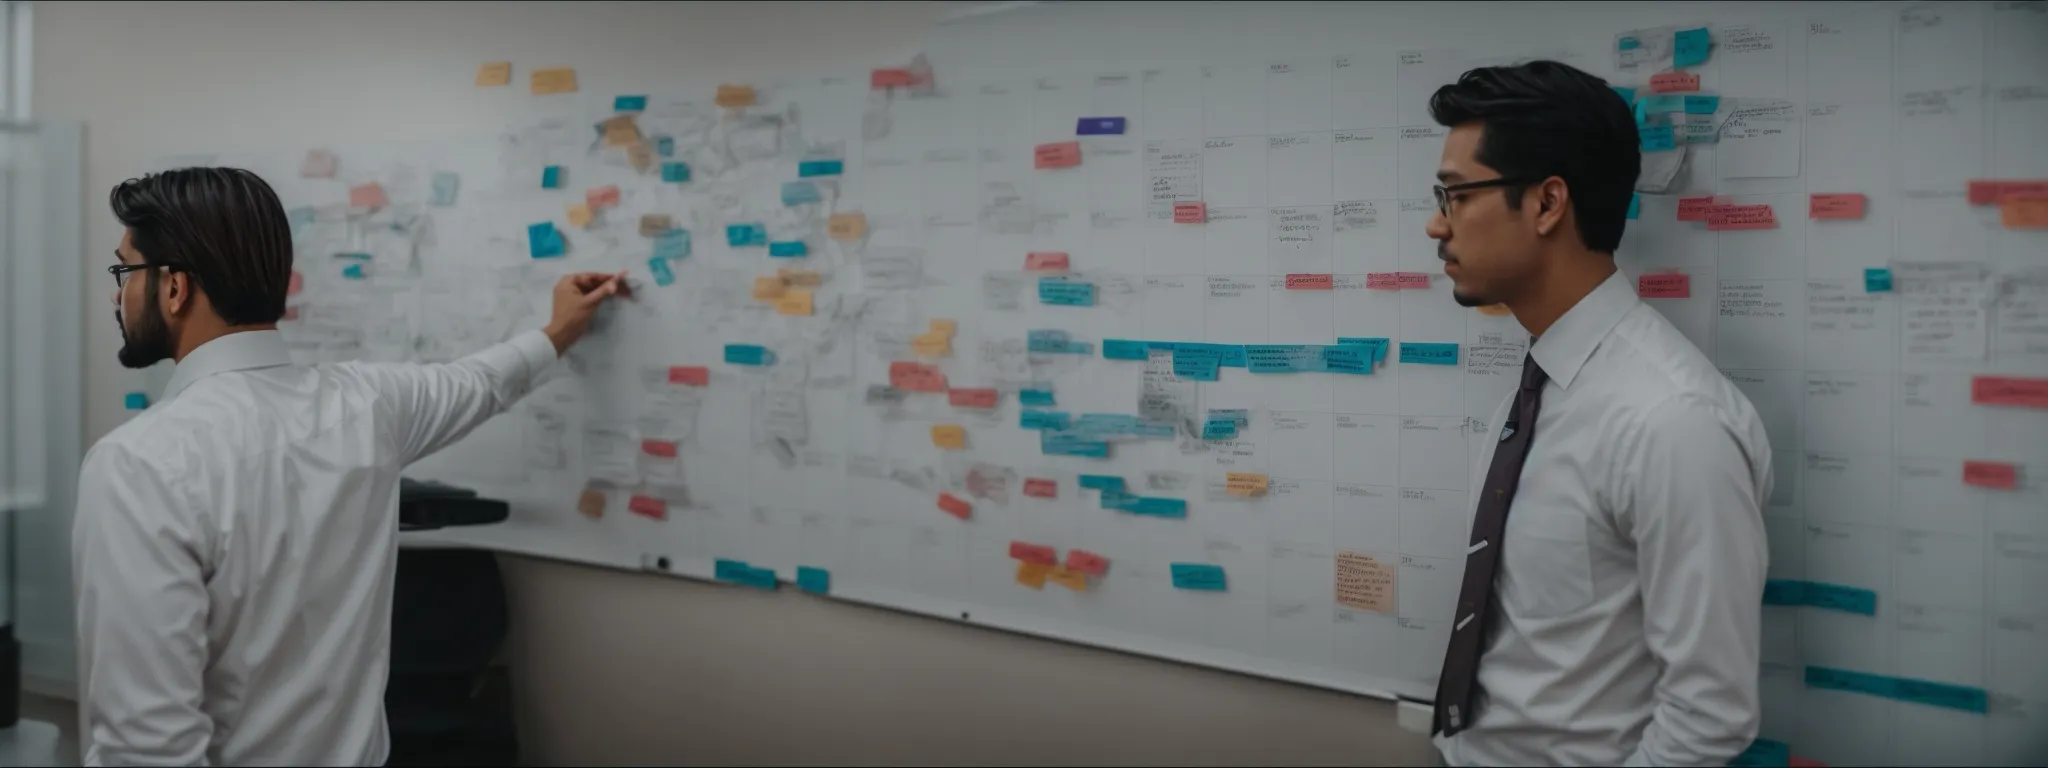 a marketer plots a content calendar on a large whiteboard filled with topic clusters connected to focal keywords.